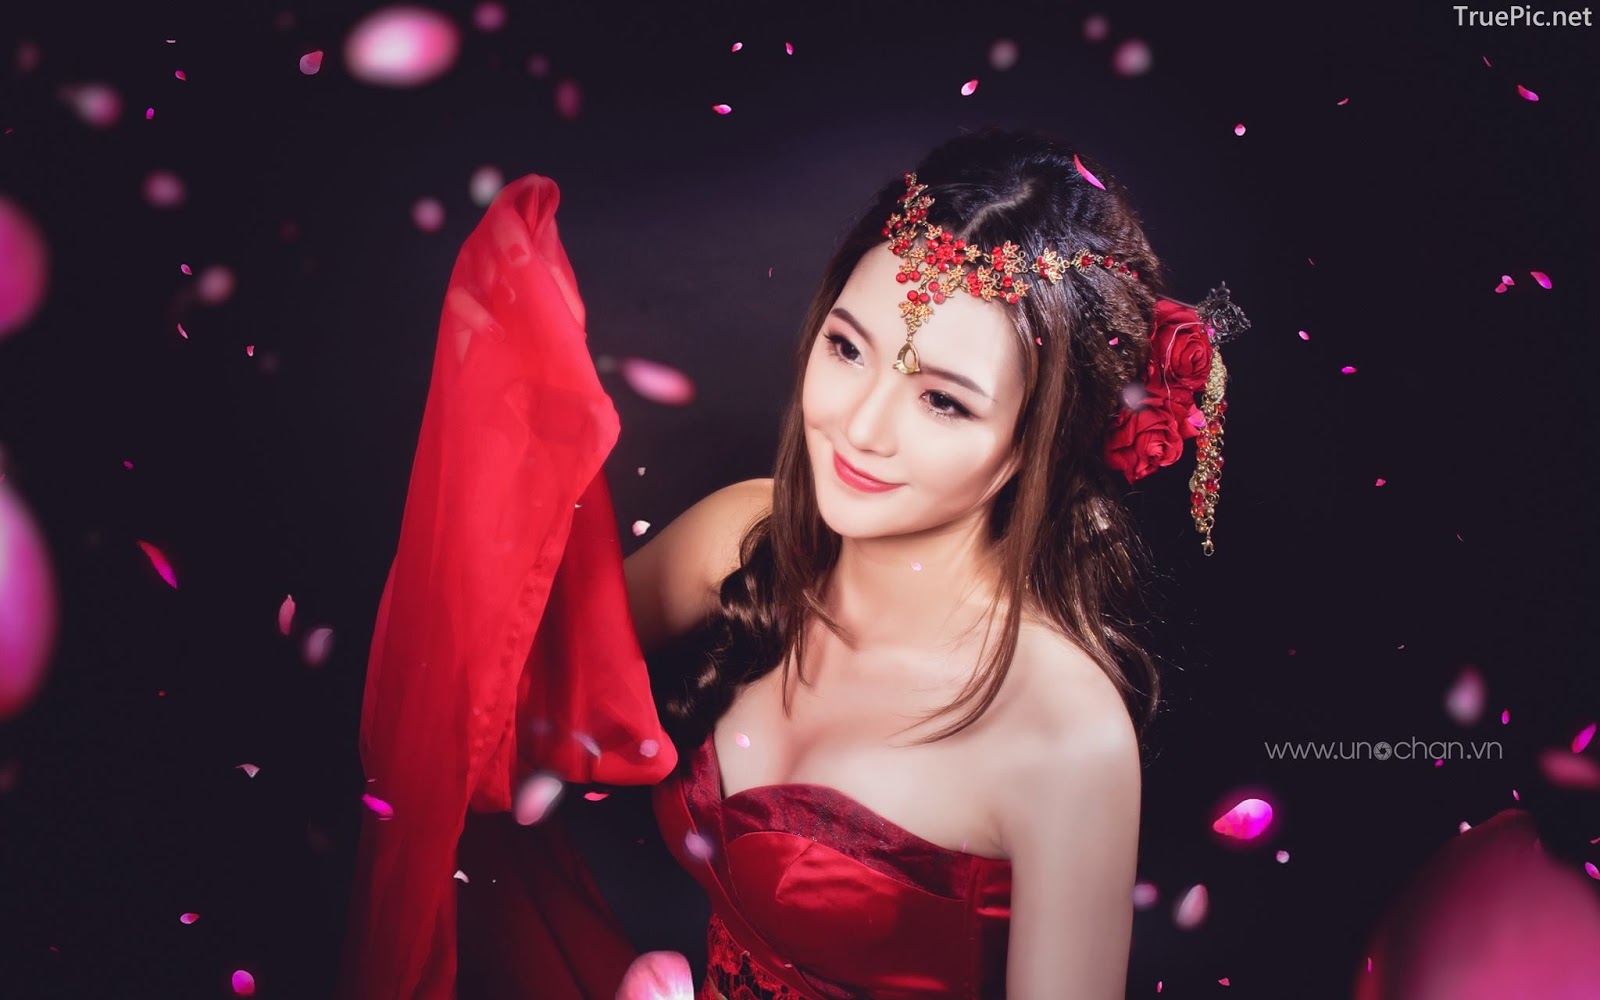 Vietnamese beautiful model Le Thu Huong - Cosplay mobile game character - Photo by Uno Chan - Picture 12